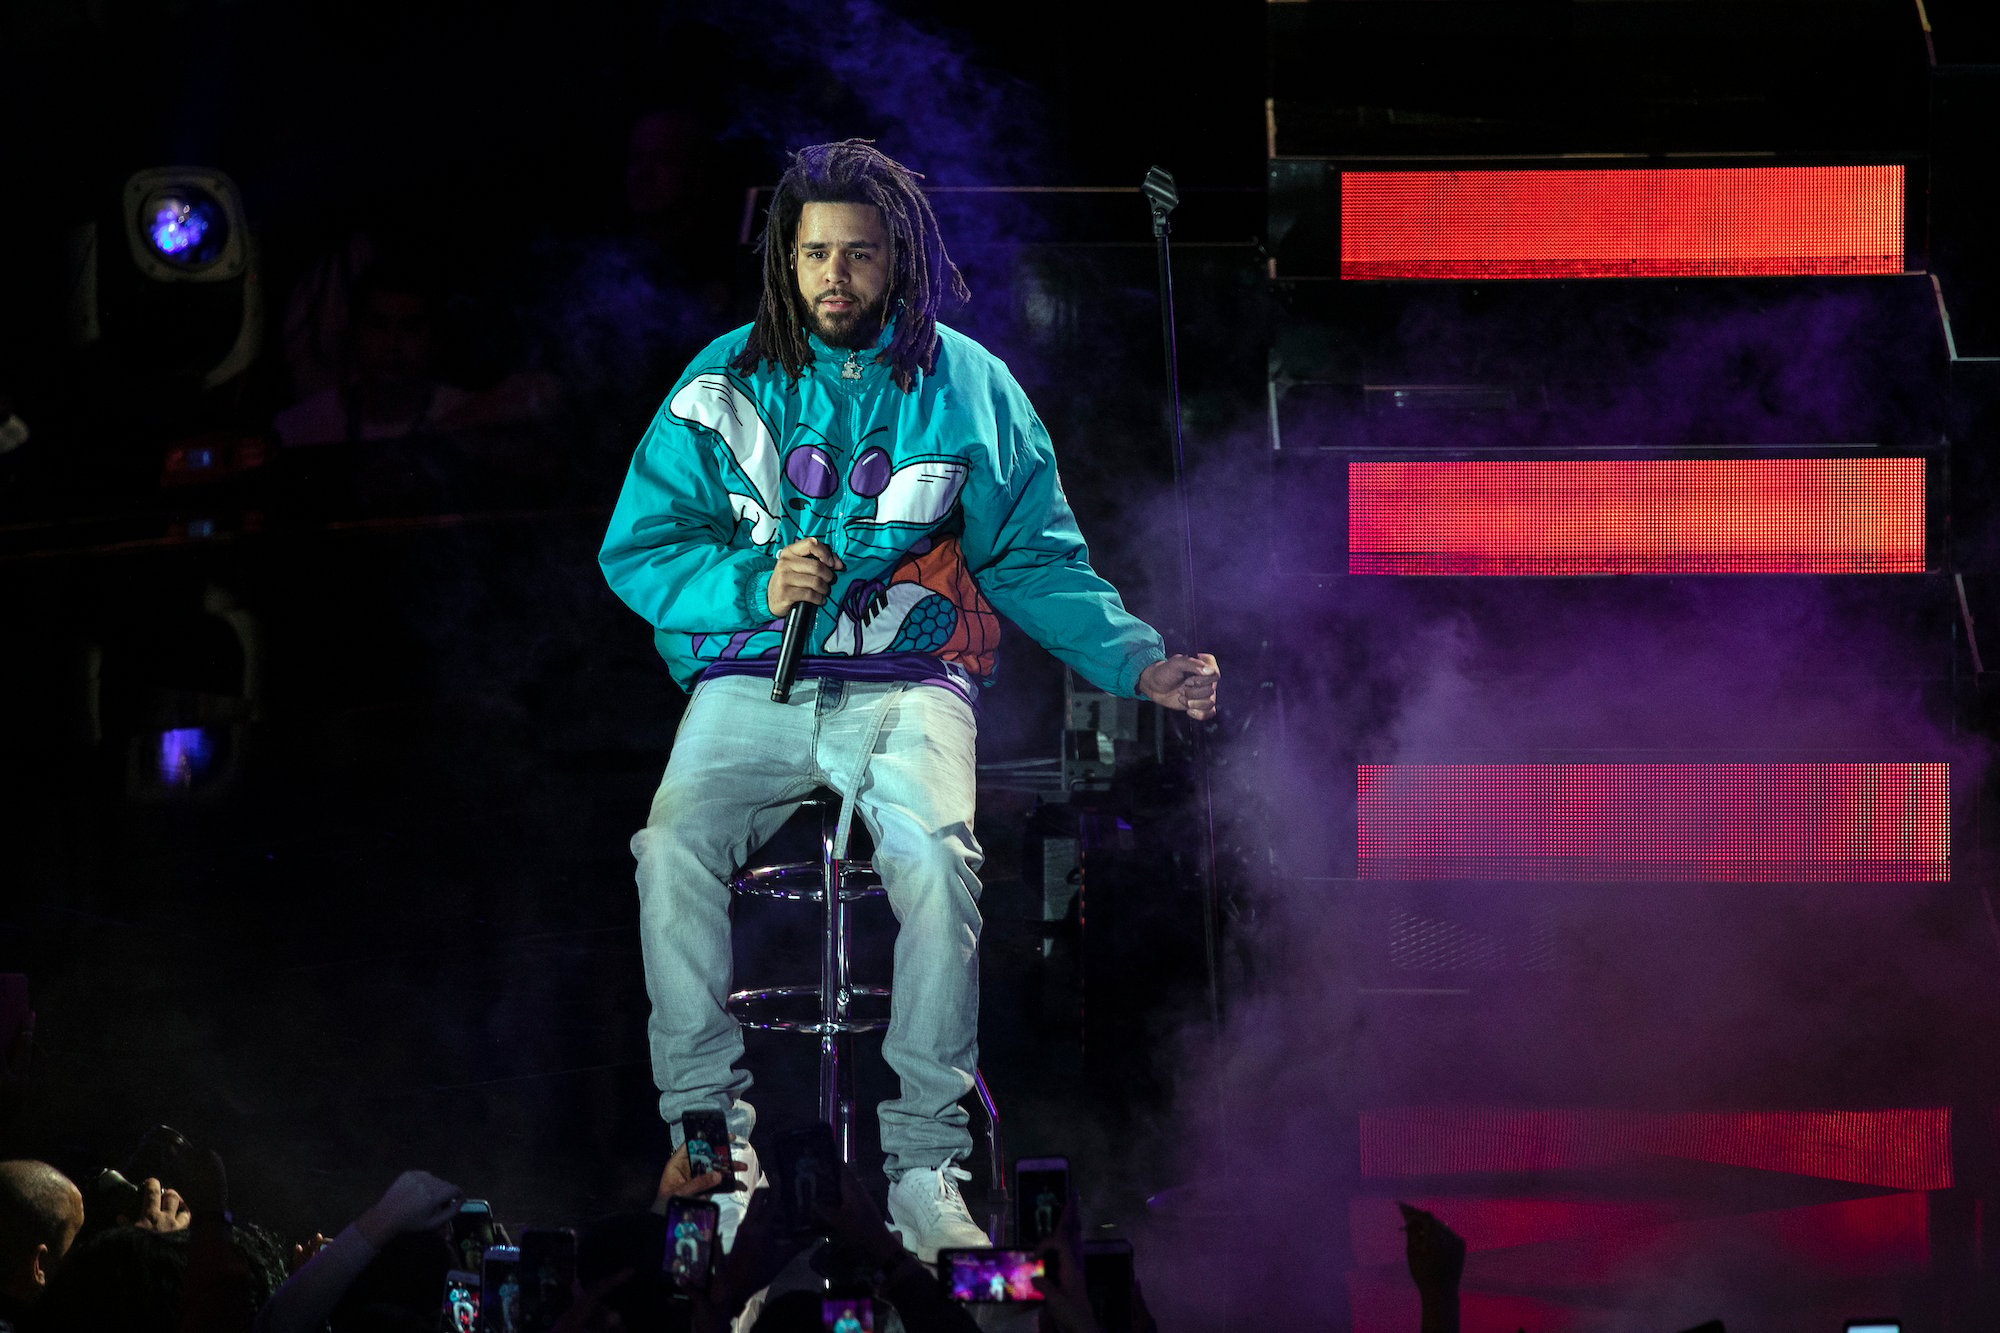 J. Cole sitting on a stool, holding a microphone on a stage